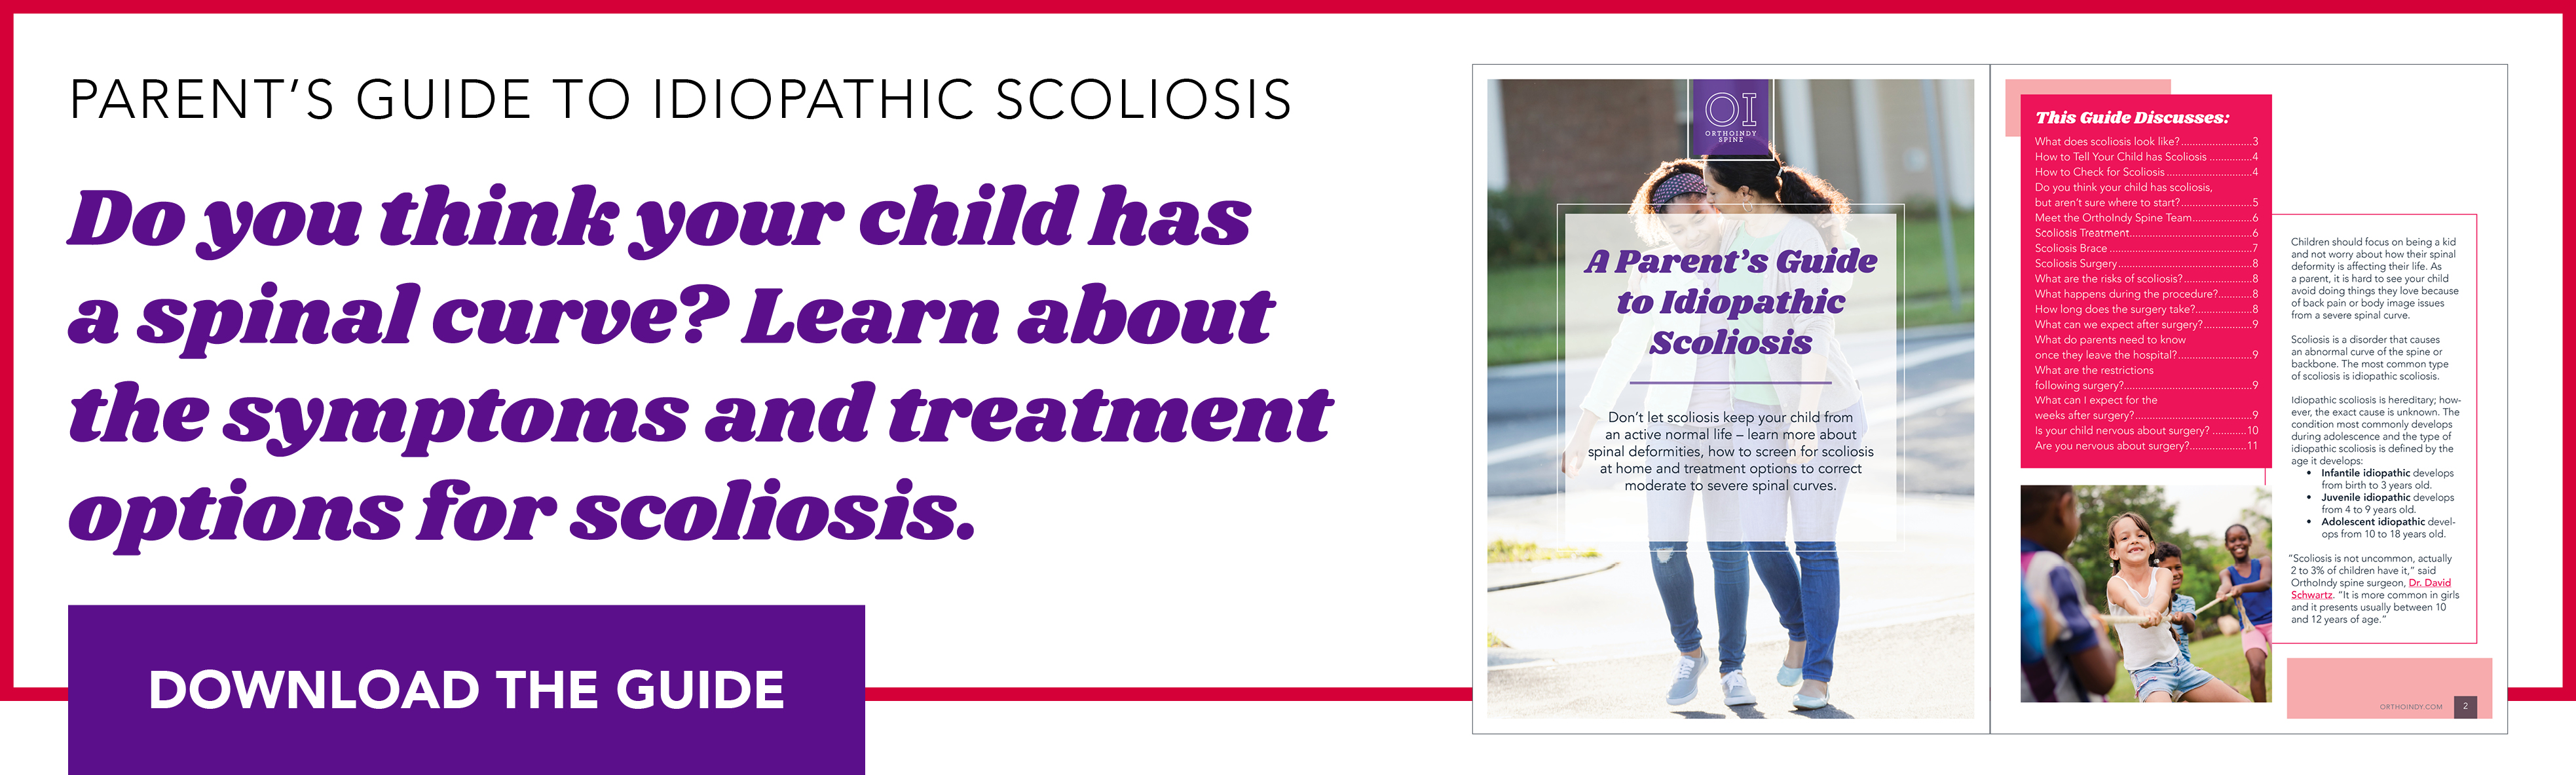 parent guide to idiopathic scoliosis download graphic